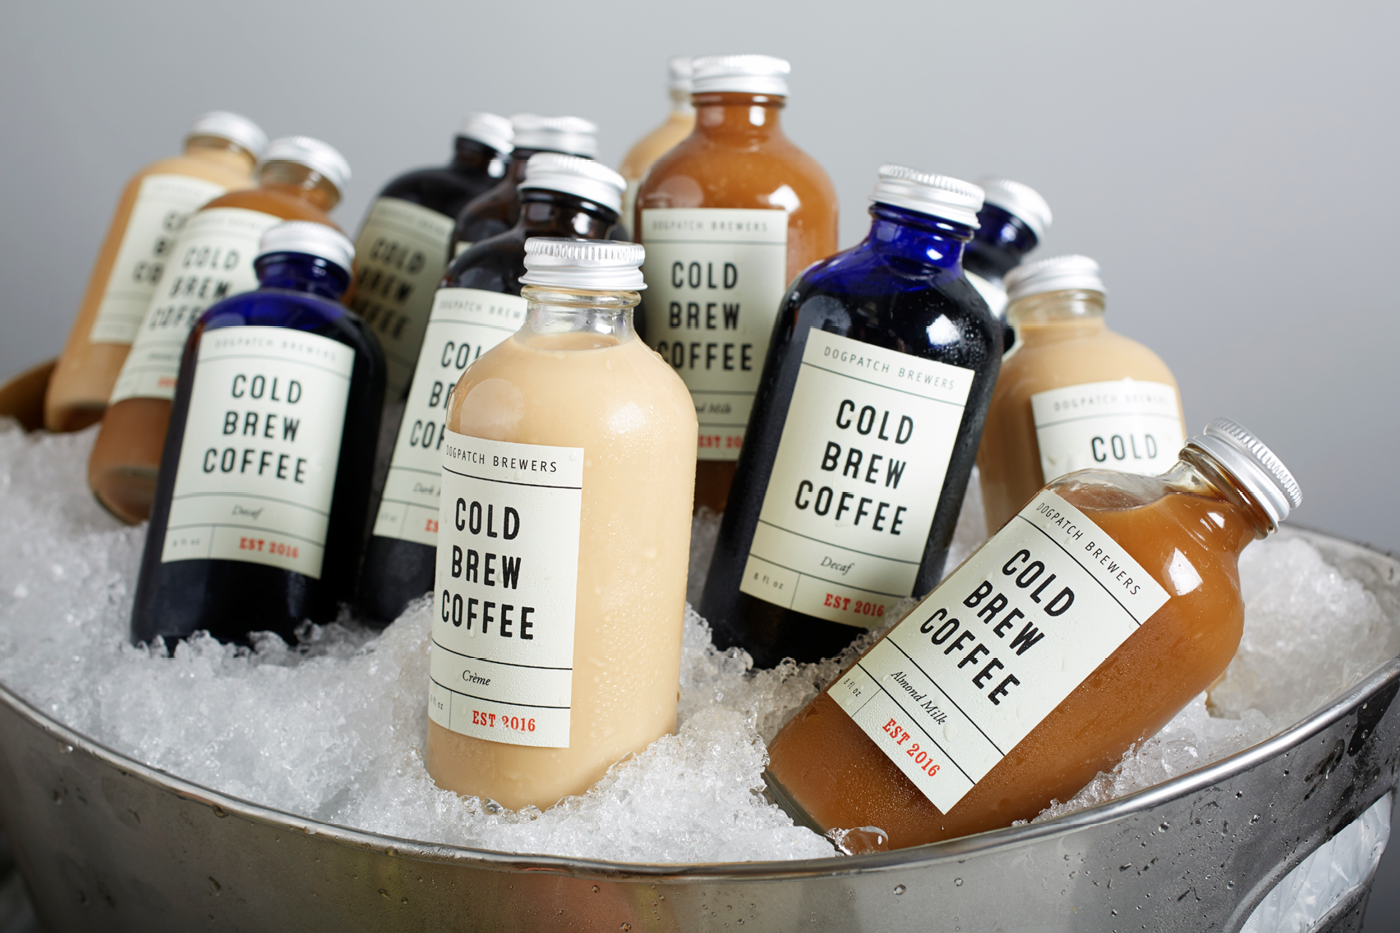 Dogpatch Brewers Cold Brew Coffees